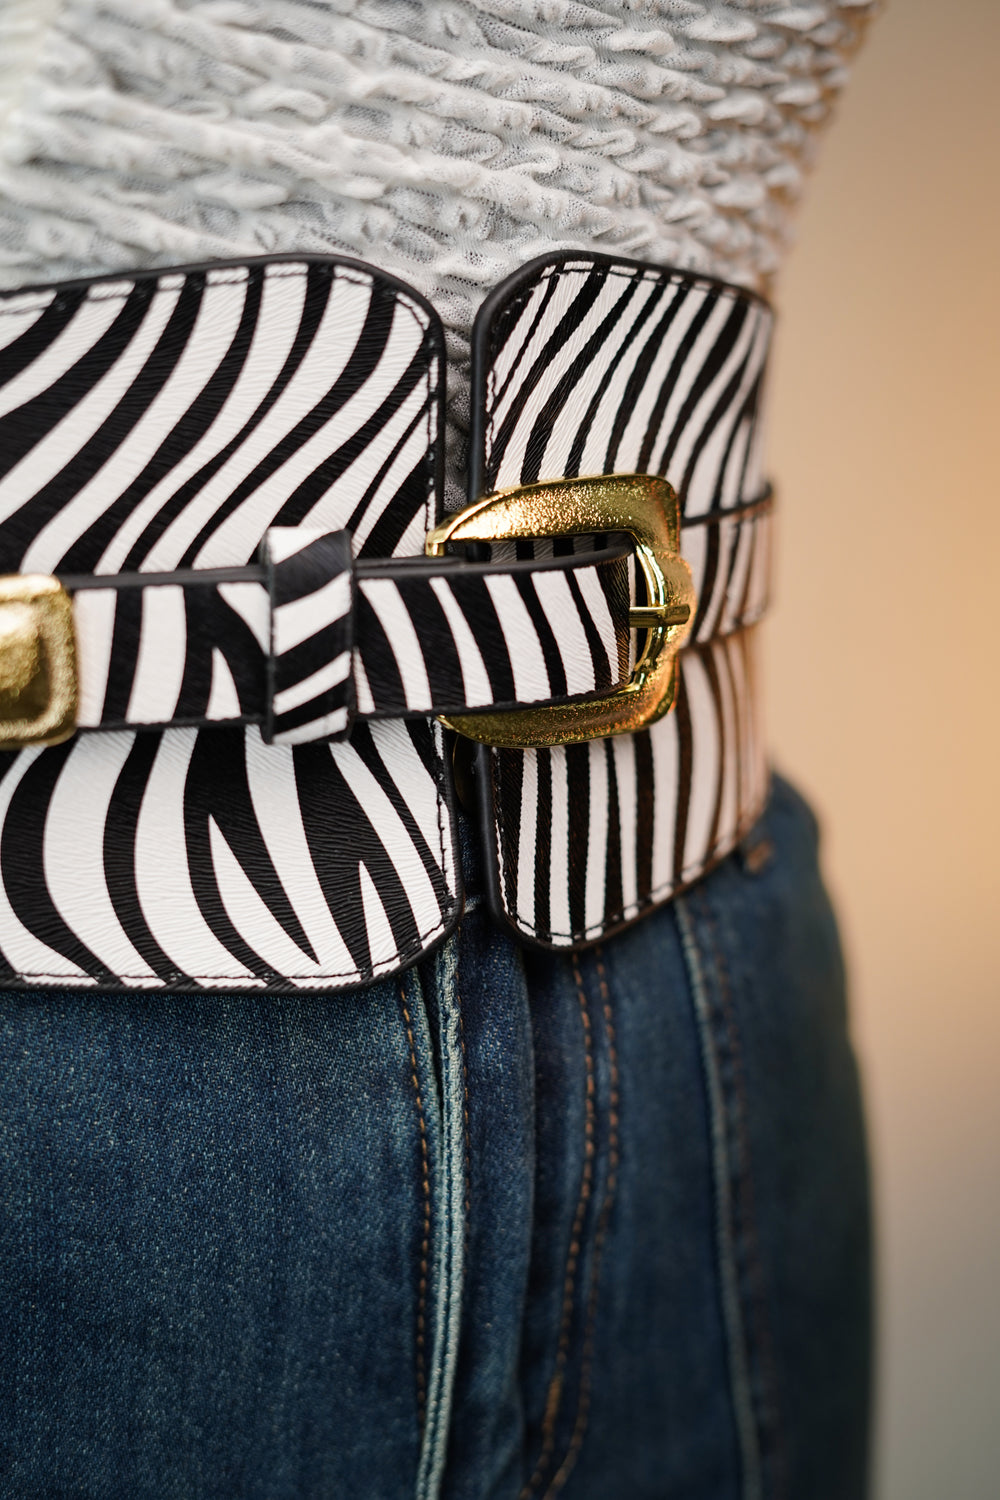 Wildly Stylish Zebra Patterned Wide Belt for Chic Outfits